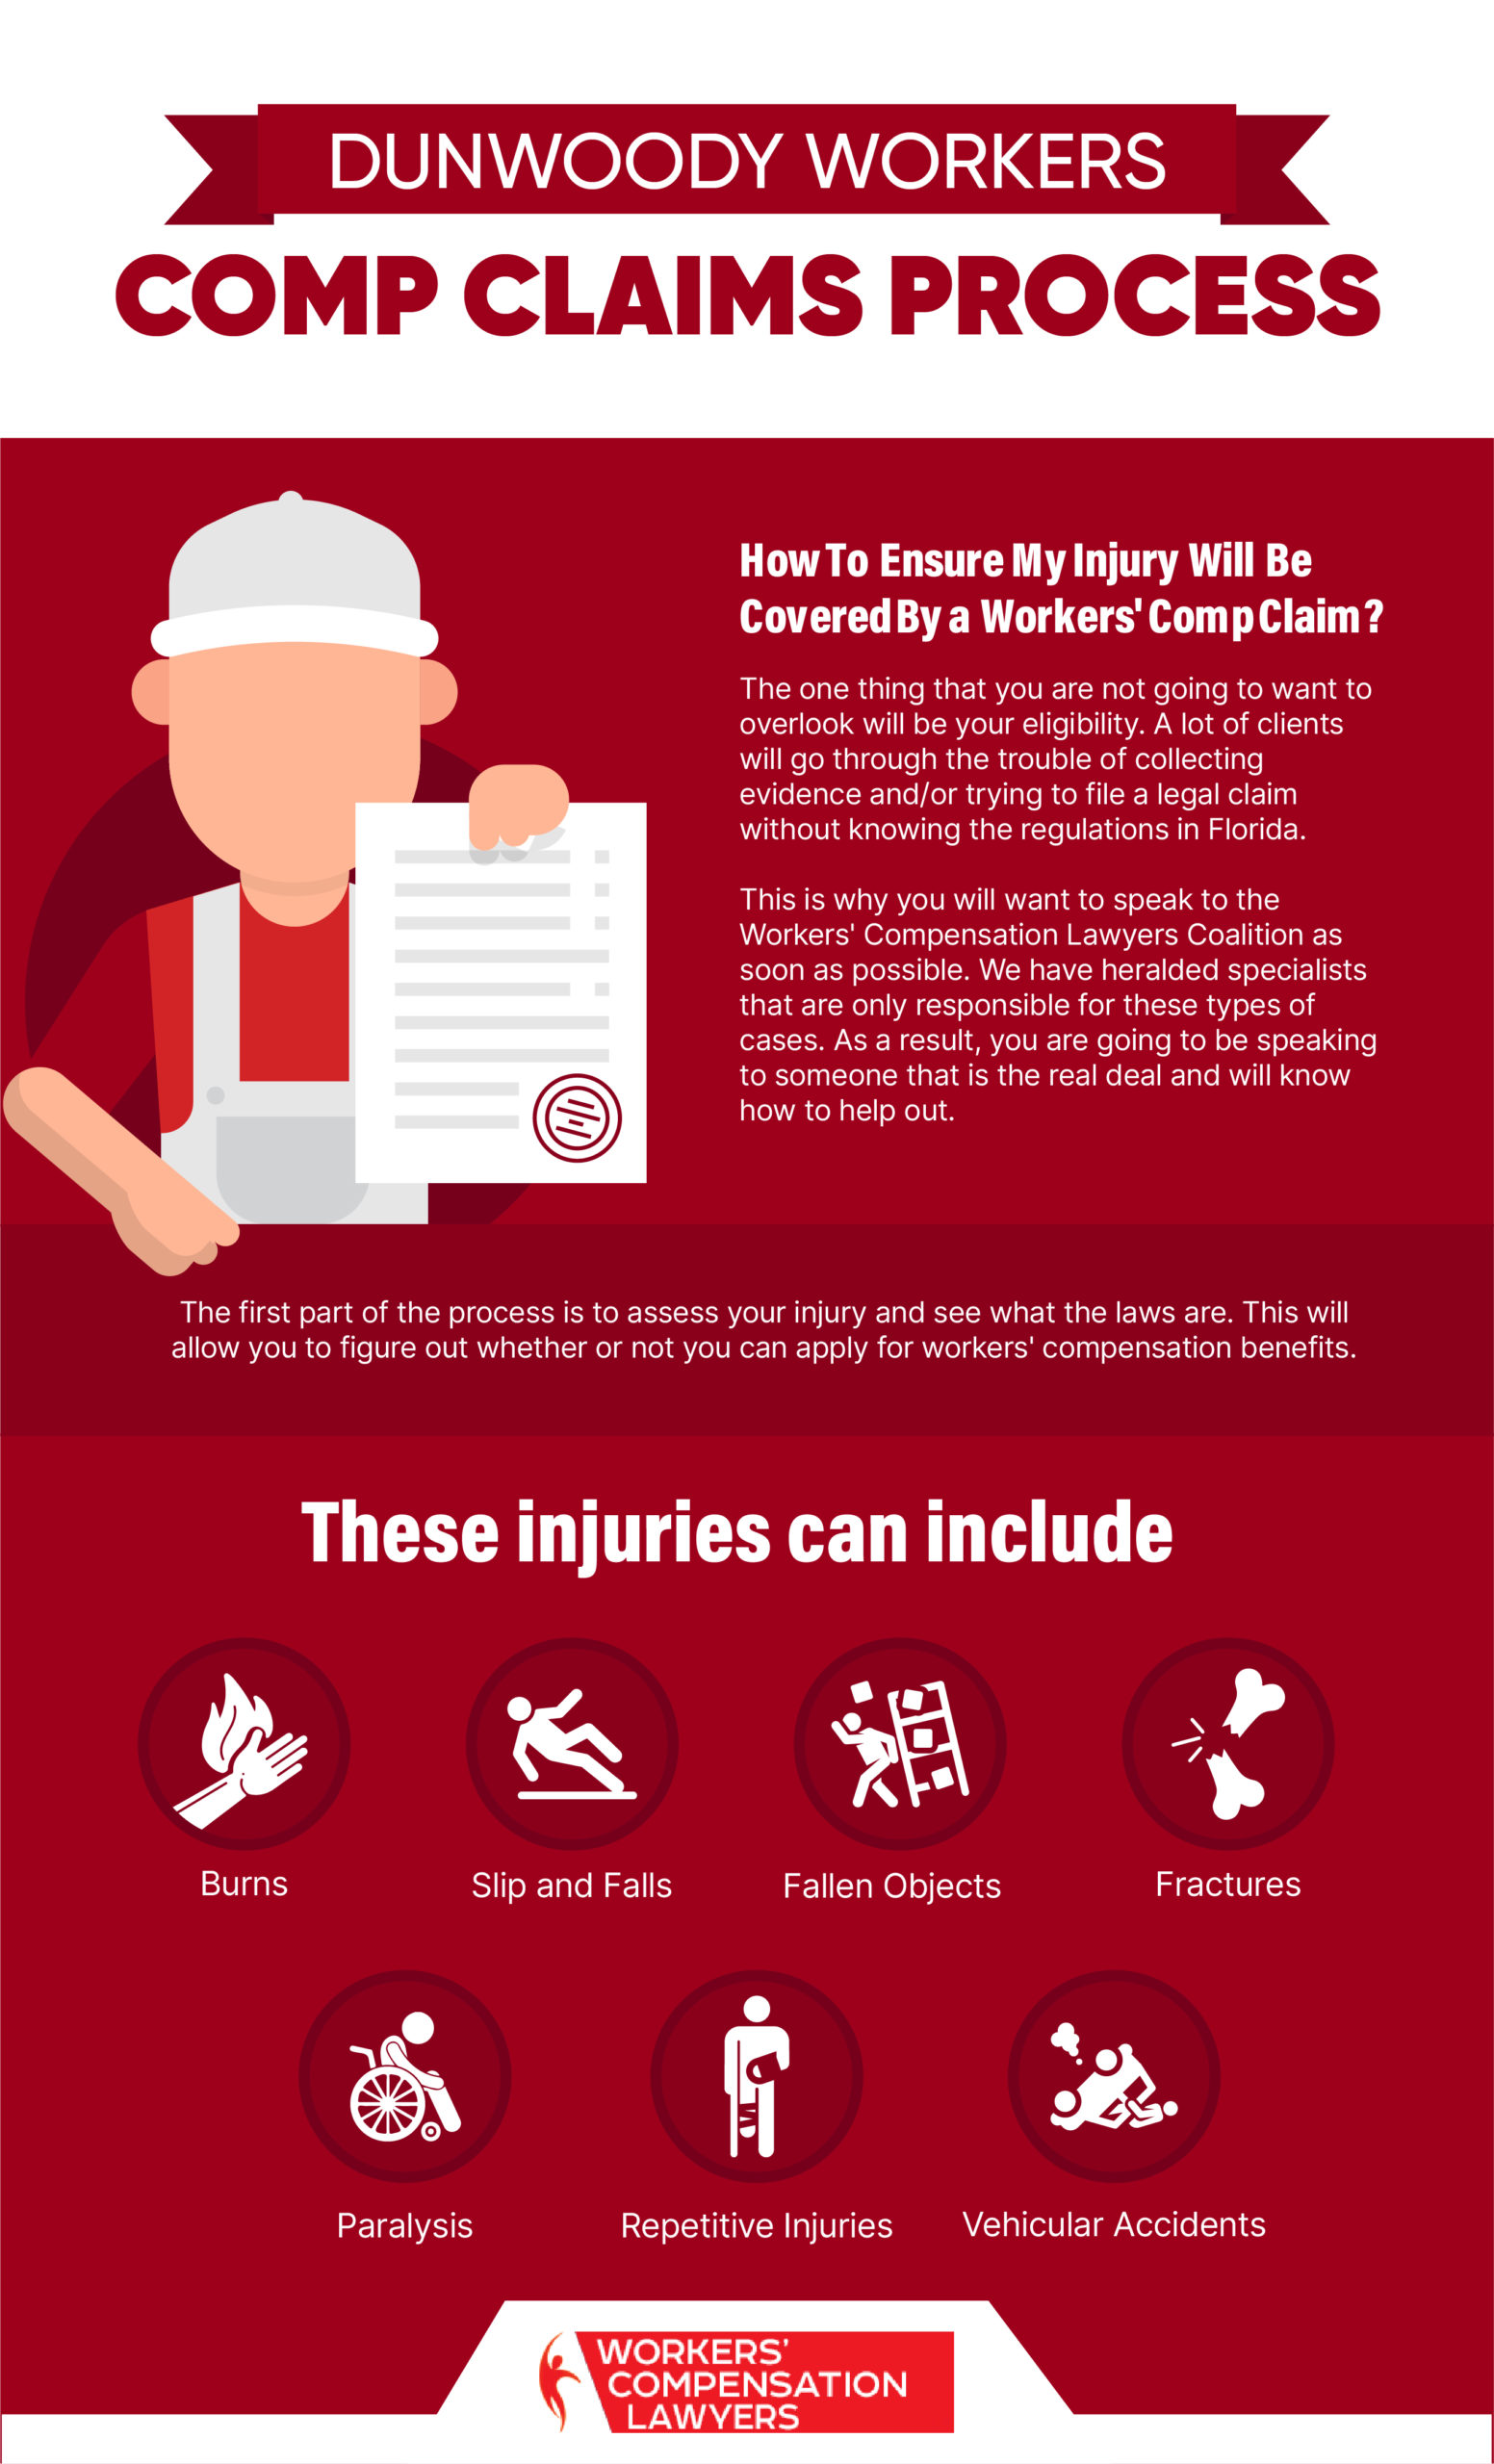 Dunwoody Workers Compensation Claims Process Infographic